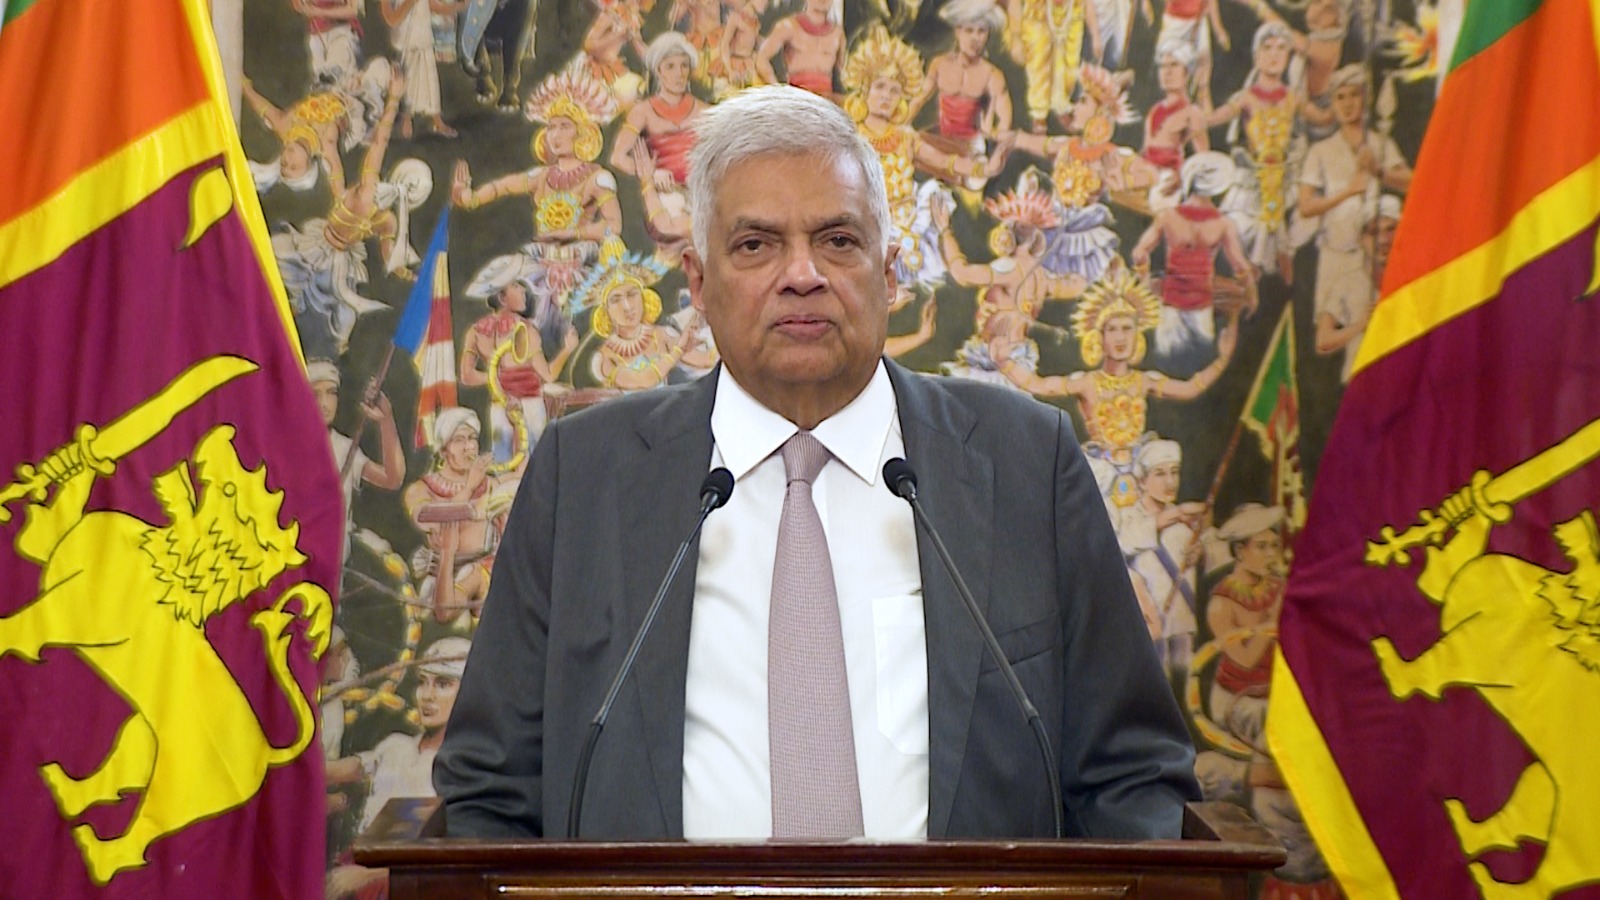 President Ranil Wickremesinghe’s special statement